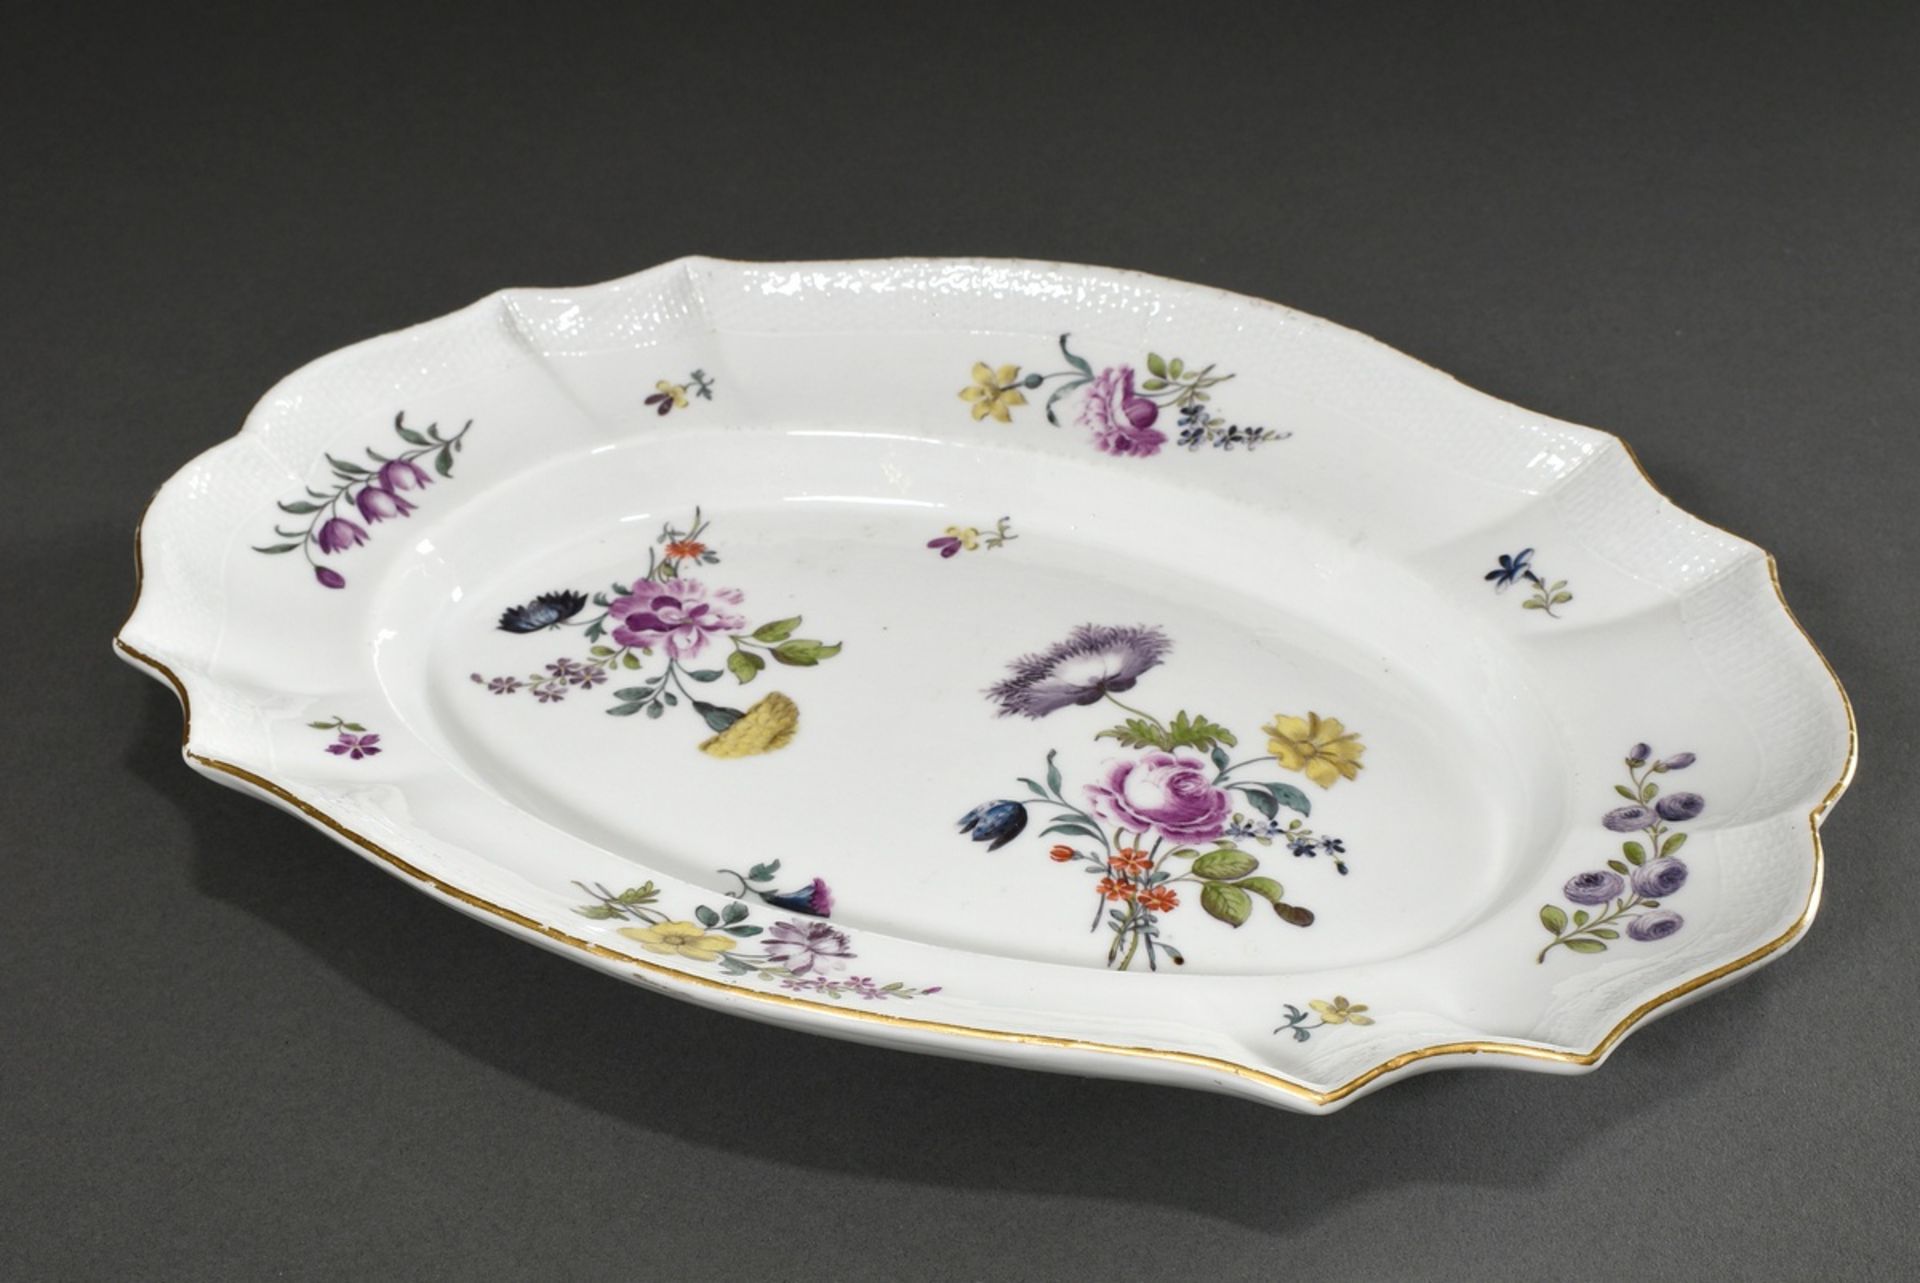 Oval Meissen plate with polychrome floral painting and basket relief as well as gold rim, 18th cent - Image 2 of 4